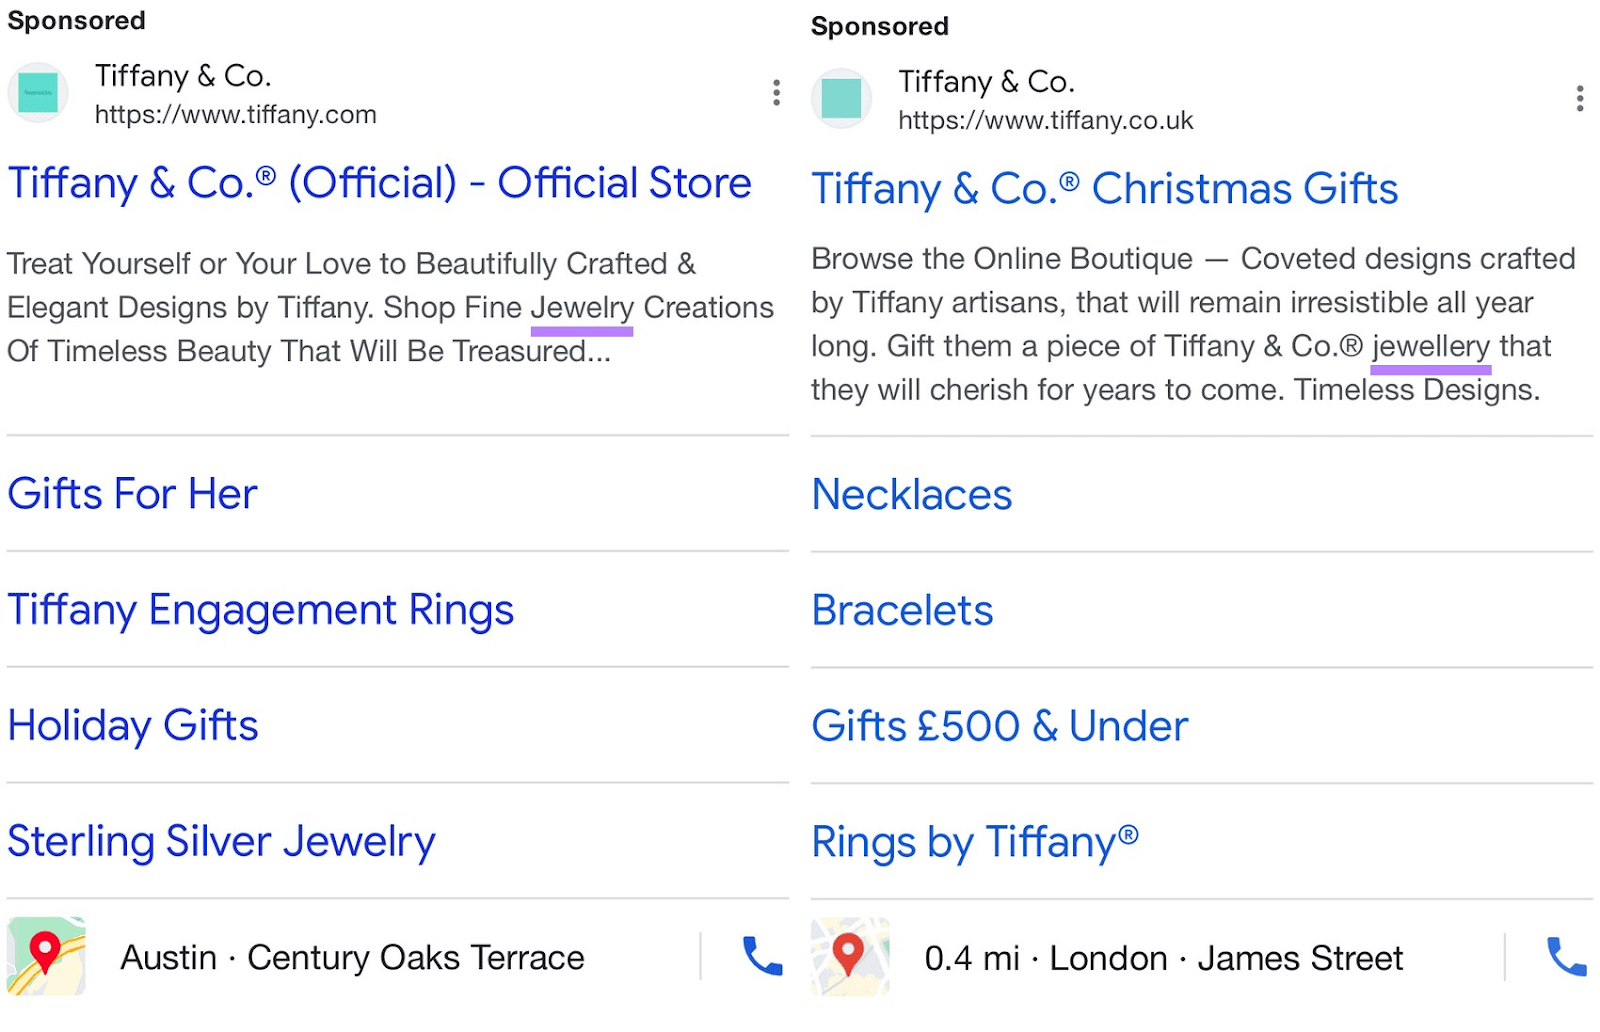 A broadside  by broadside  examination  of Tiffany & Co.'s mobile ad, with "jewelry" highlighted successful  the US ad, and "jewellery" successful  the UK ad